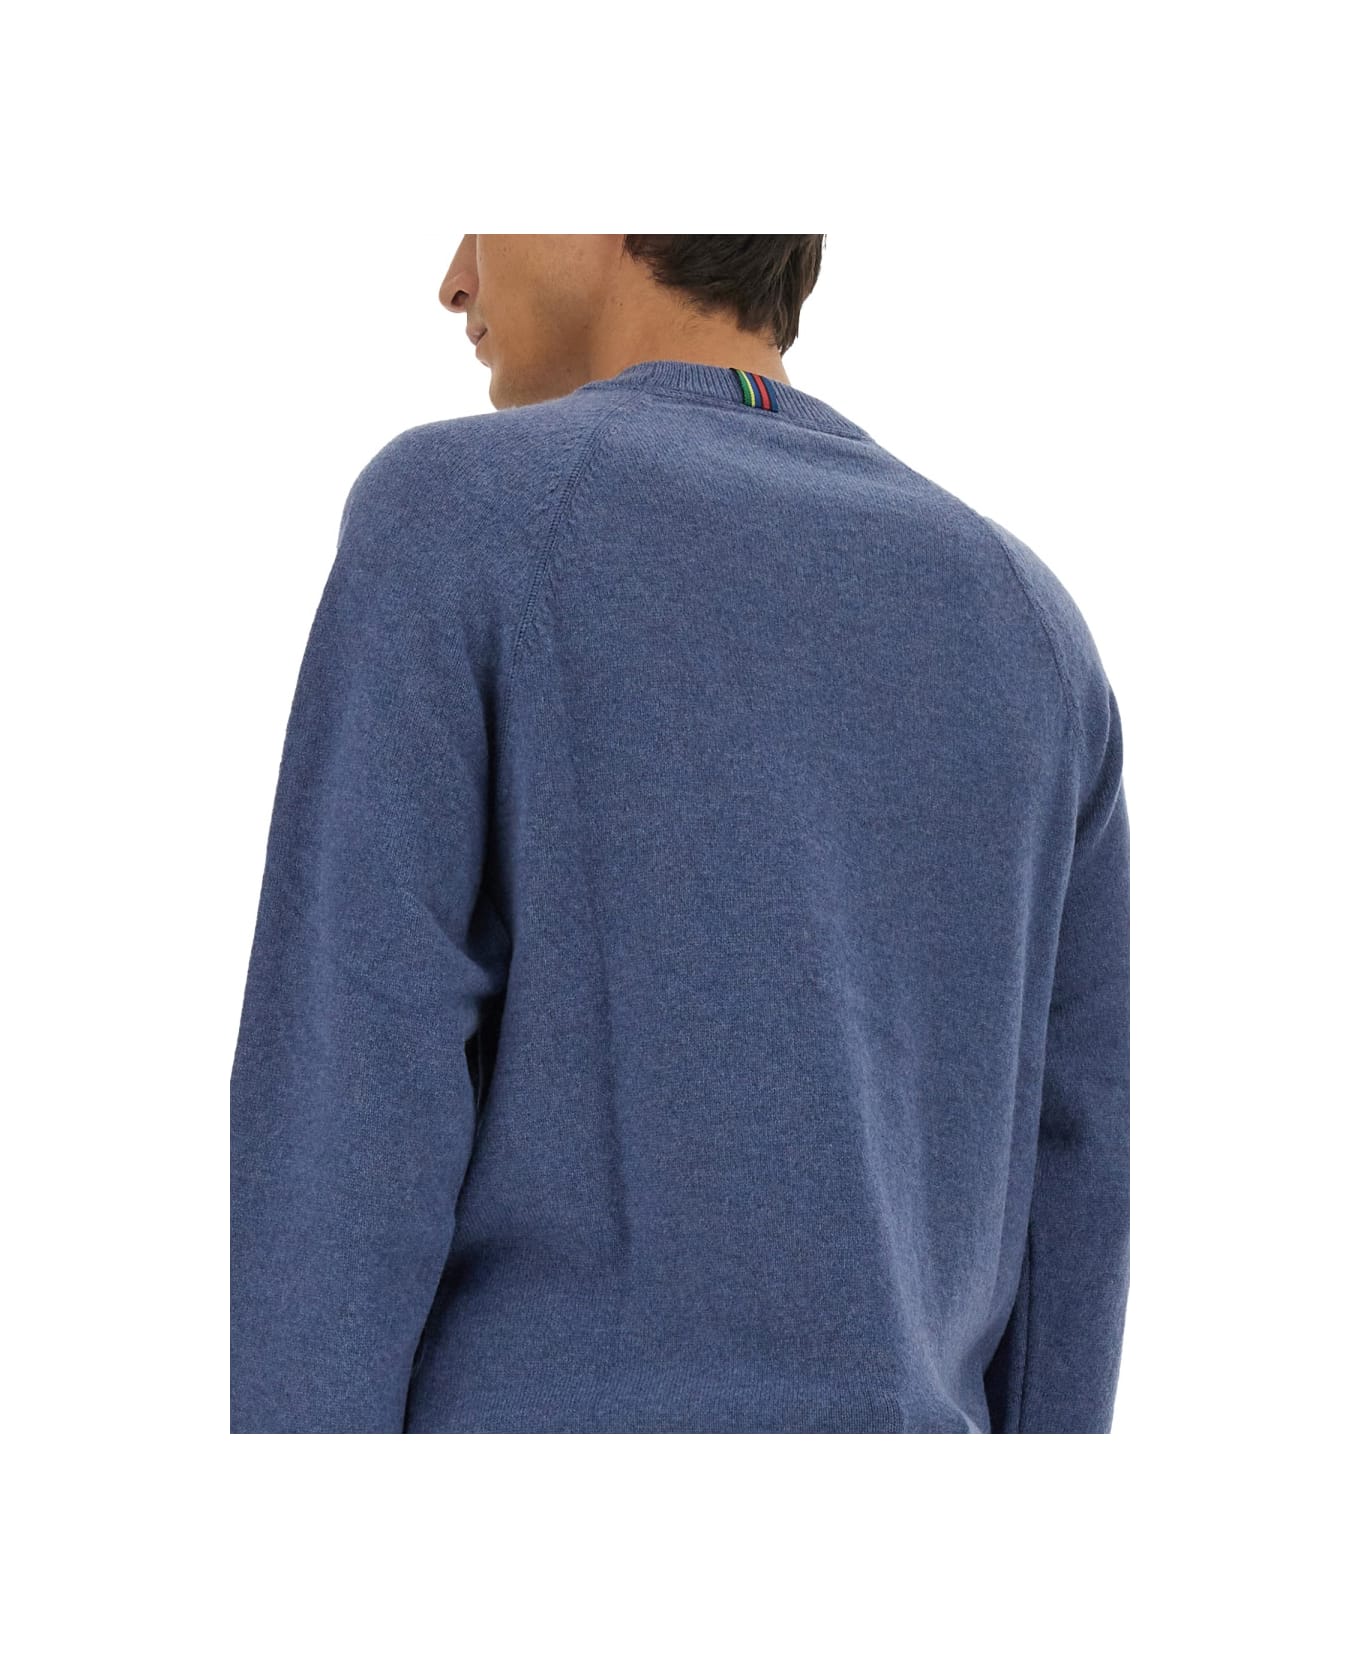 PS by Paul Smith Wool Jersey. - BLUE ニットウェア